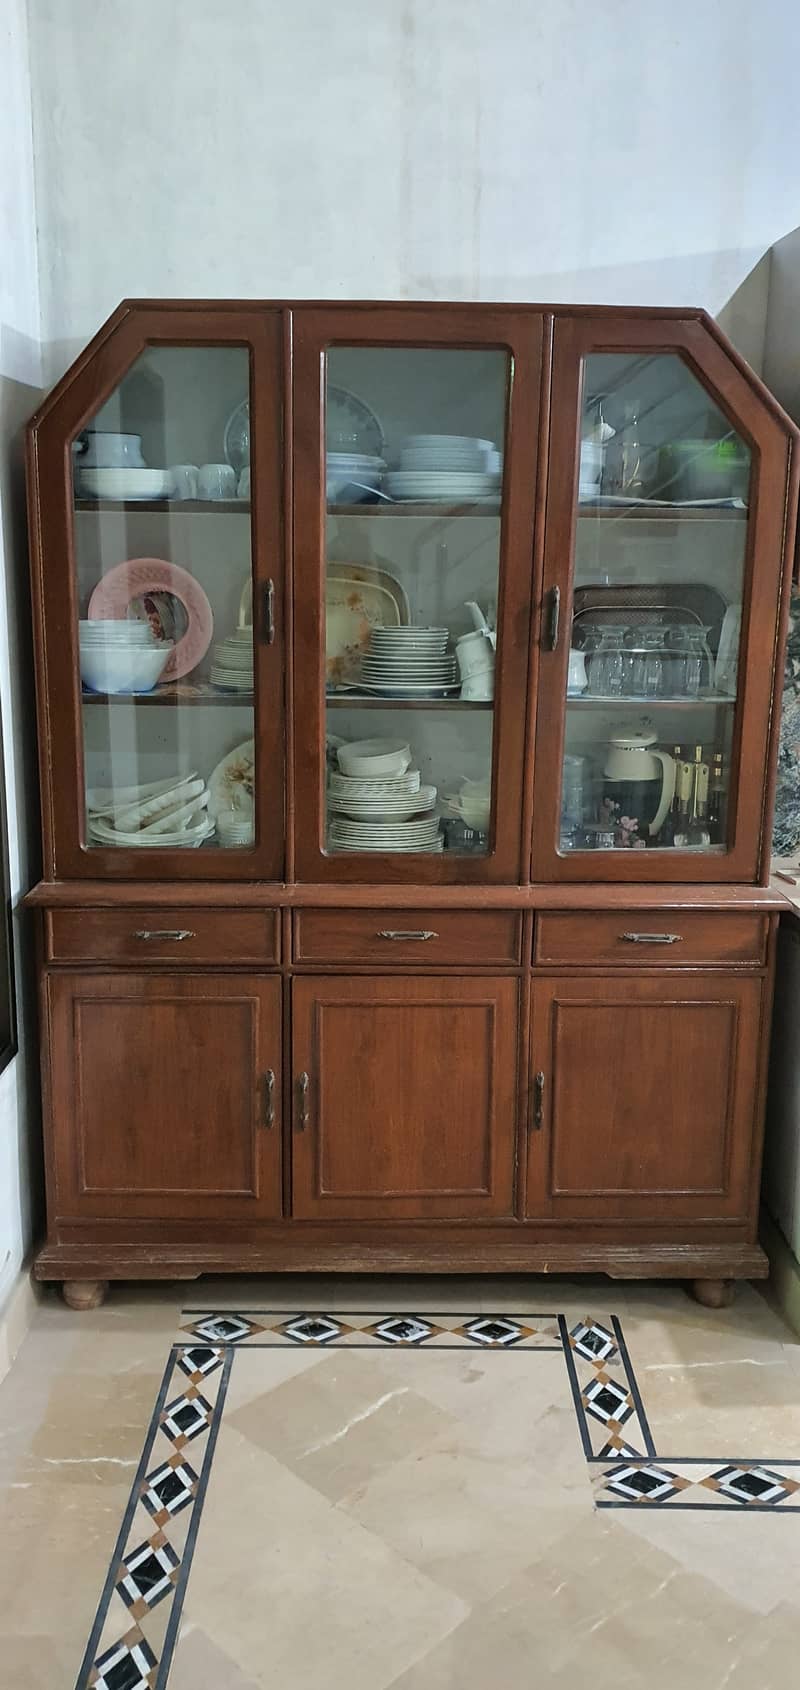 Wooden CROCKERY SHOW CASE and DRESSING TABLE 1